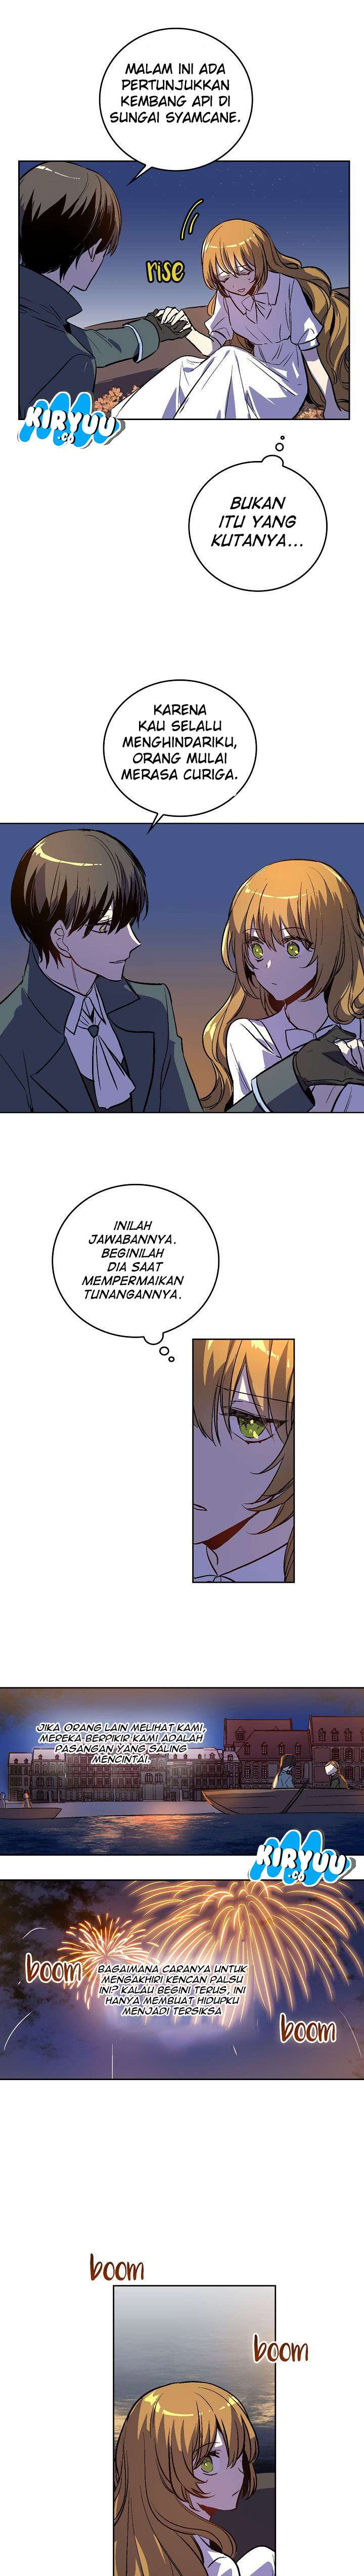 The Reason Why Raeliana Ended Up at the Duke’s Mansion Chapter 27 Bahasa Indonesia